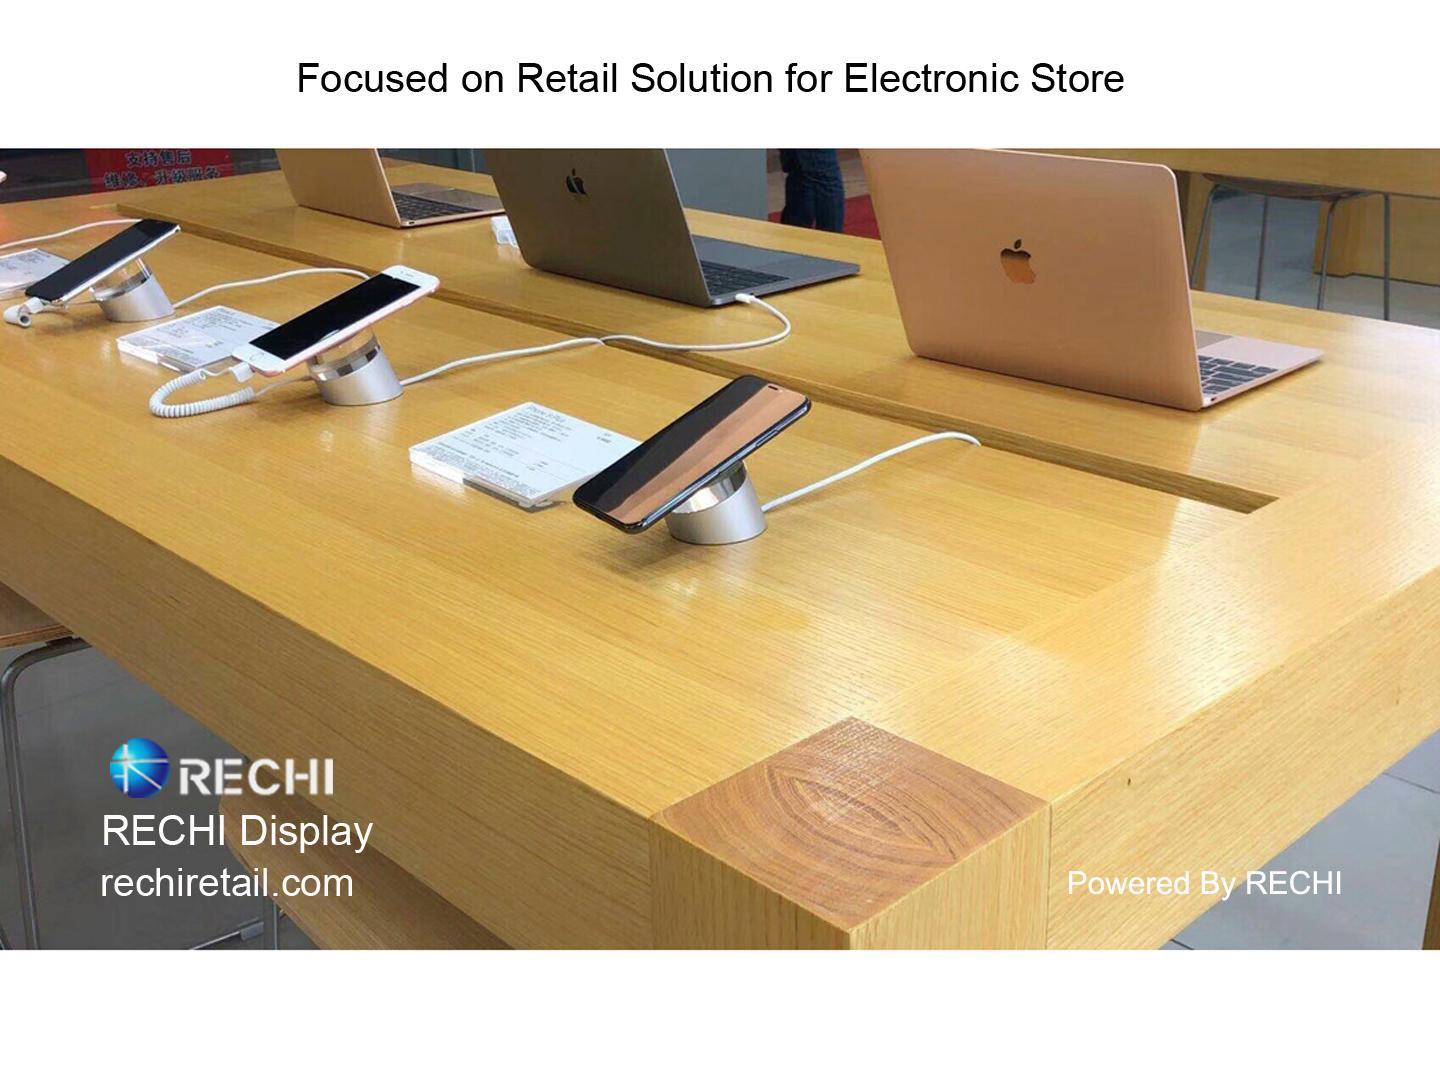 RECHI Merchandising Security Solution for Apple iPhone